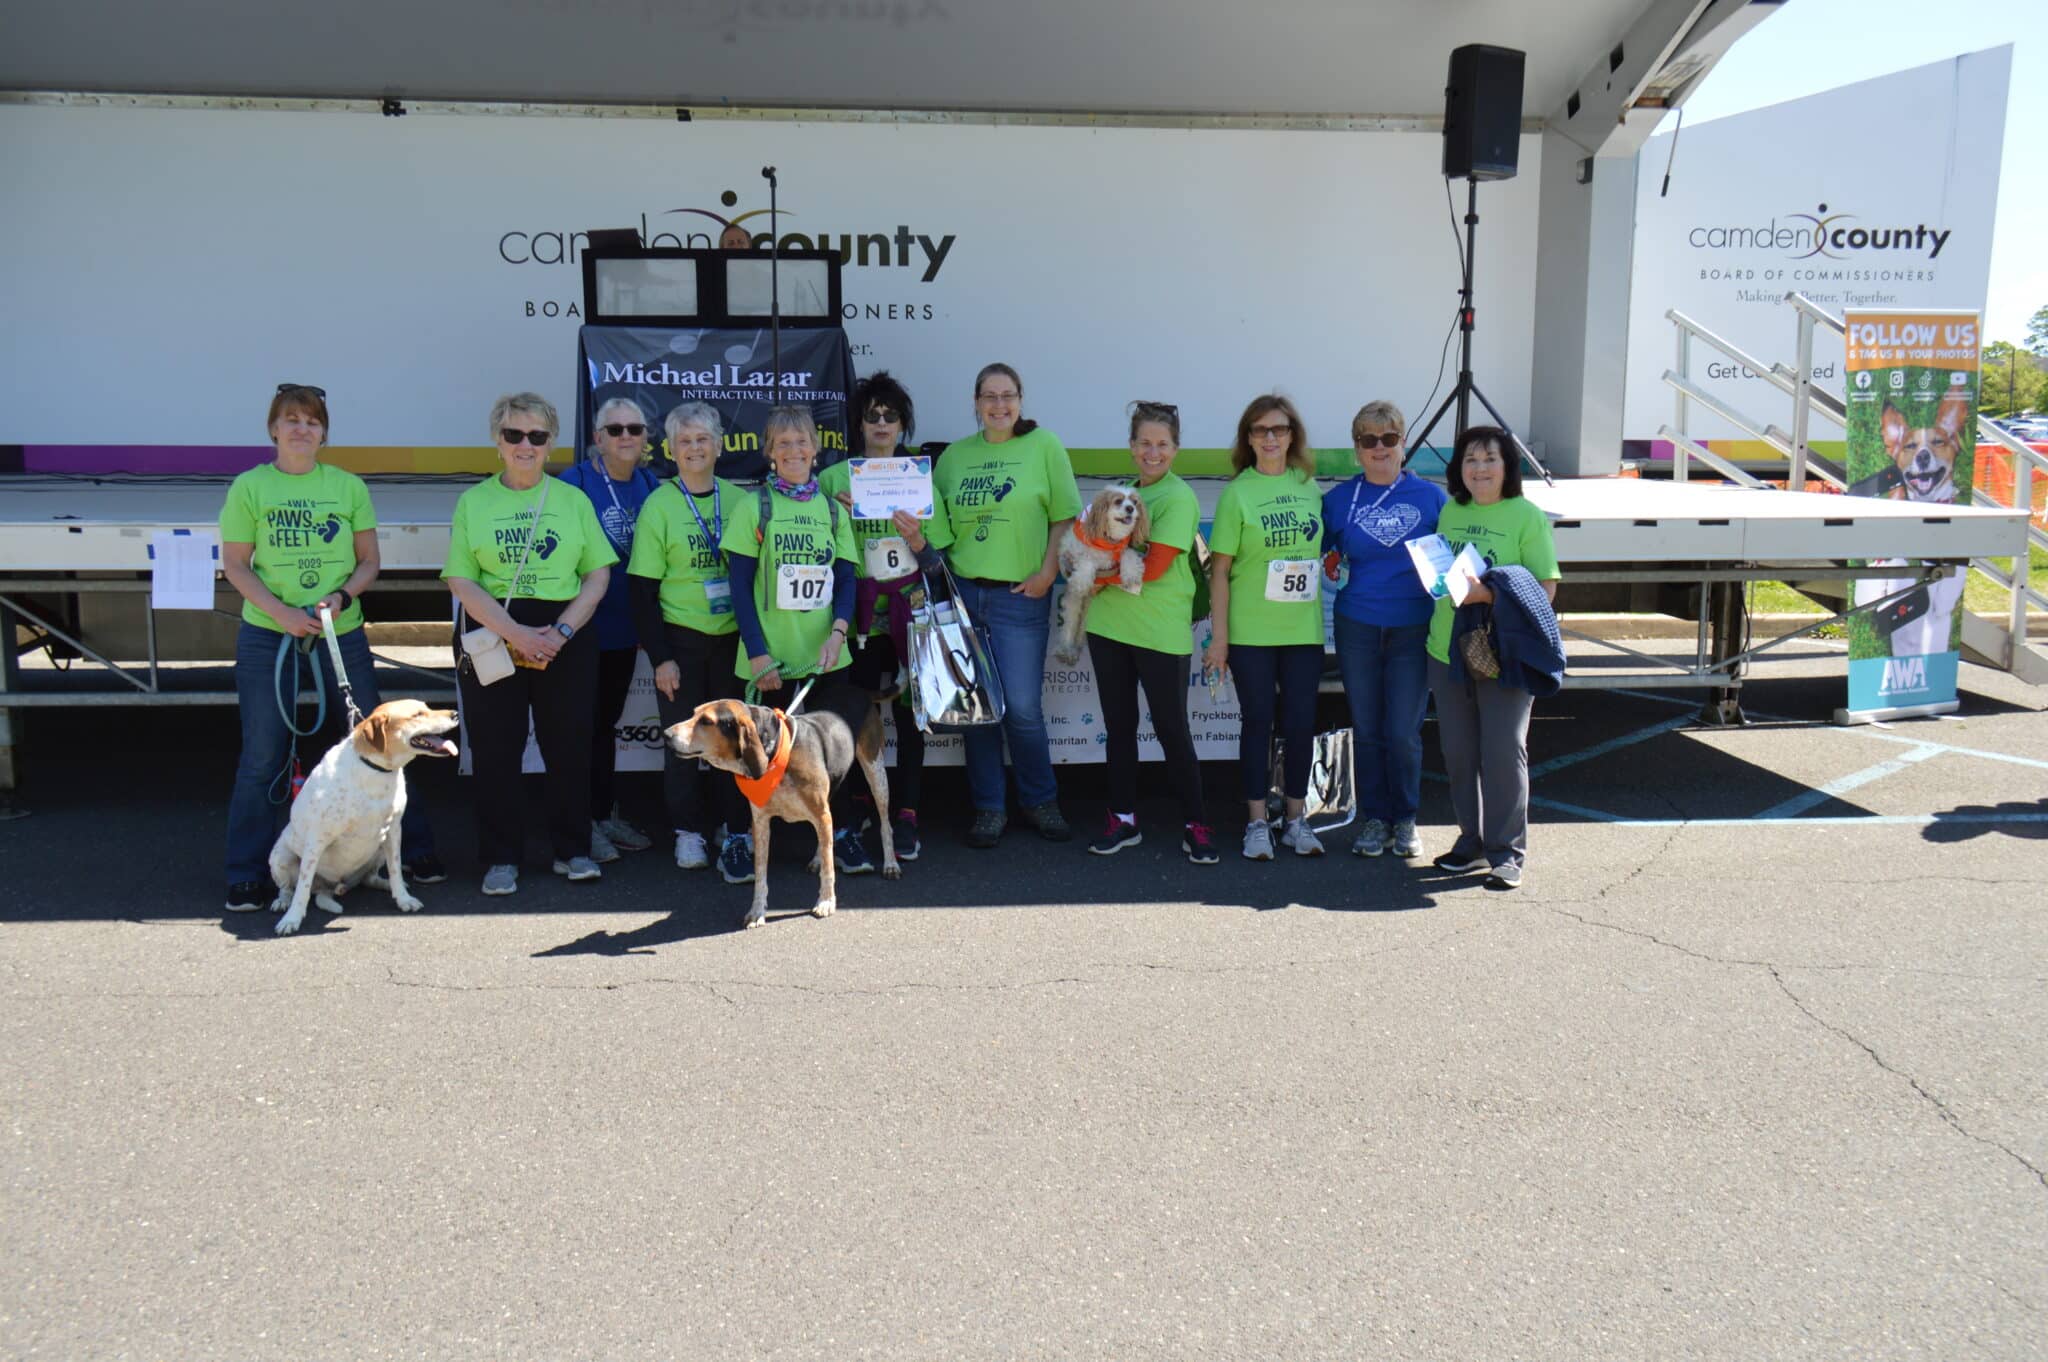 Group of women in green shirts with 2 dogs posing at Paws & Feet stage.